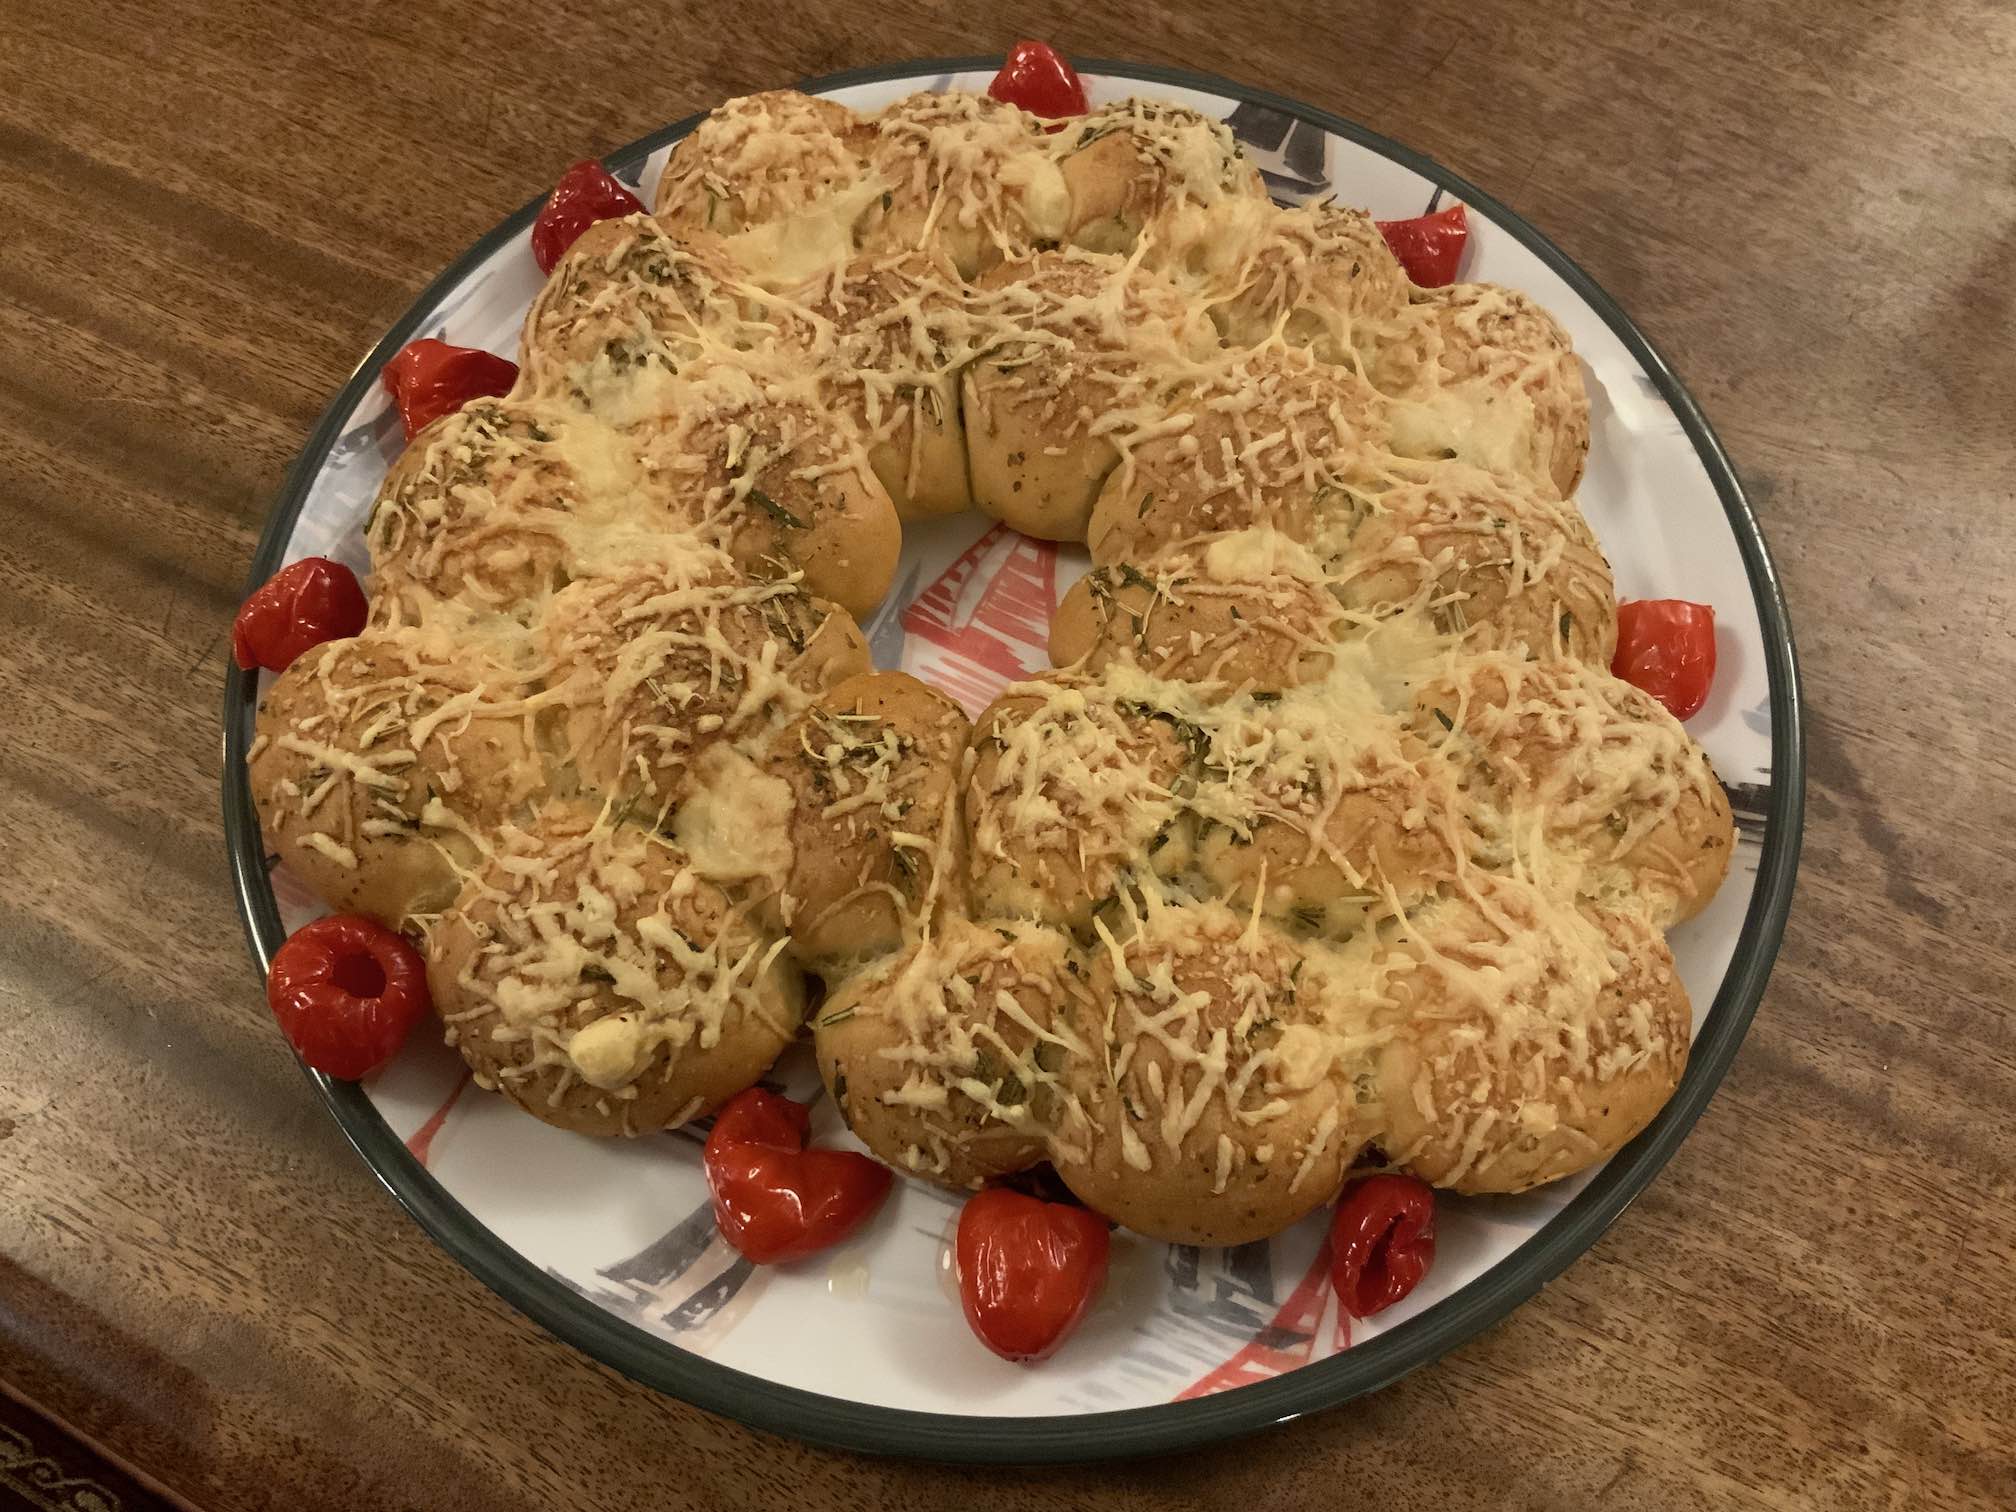 Photo of a large plate of bread balls topped with cheese and herbs, with will little peppers around the edge.